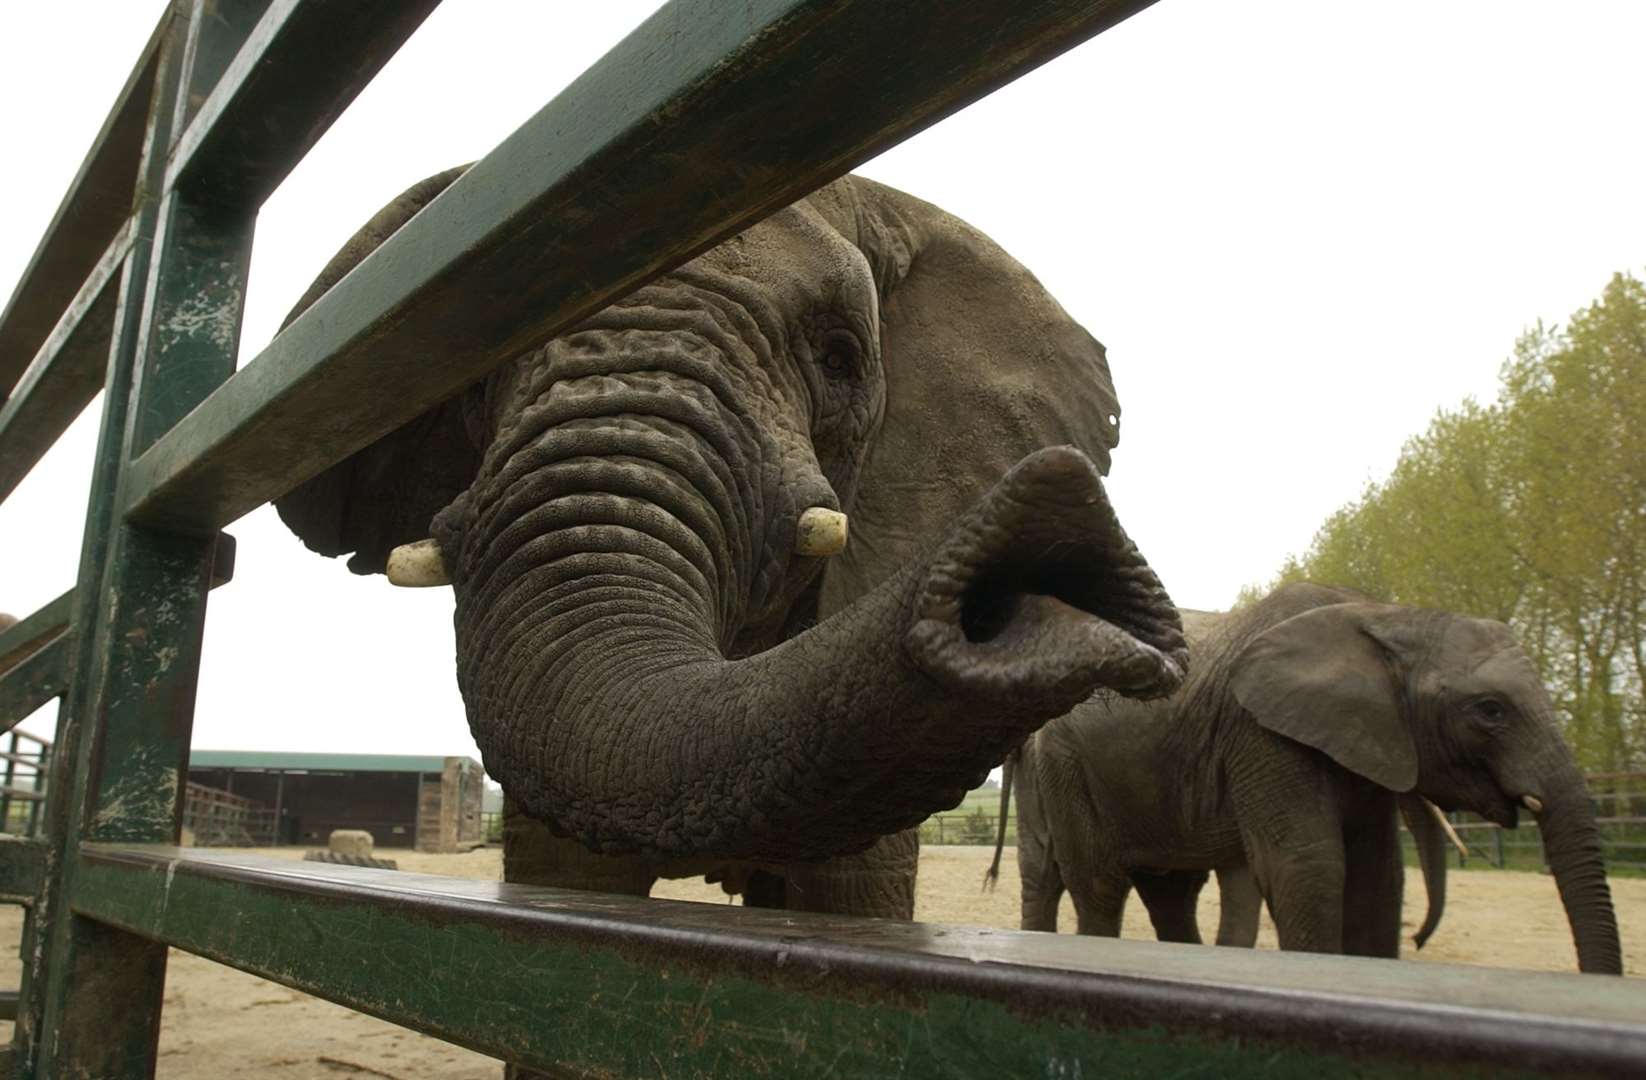 There will soon be no elephants in captivity in the county